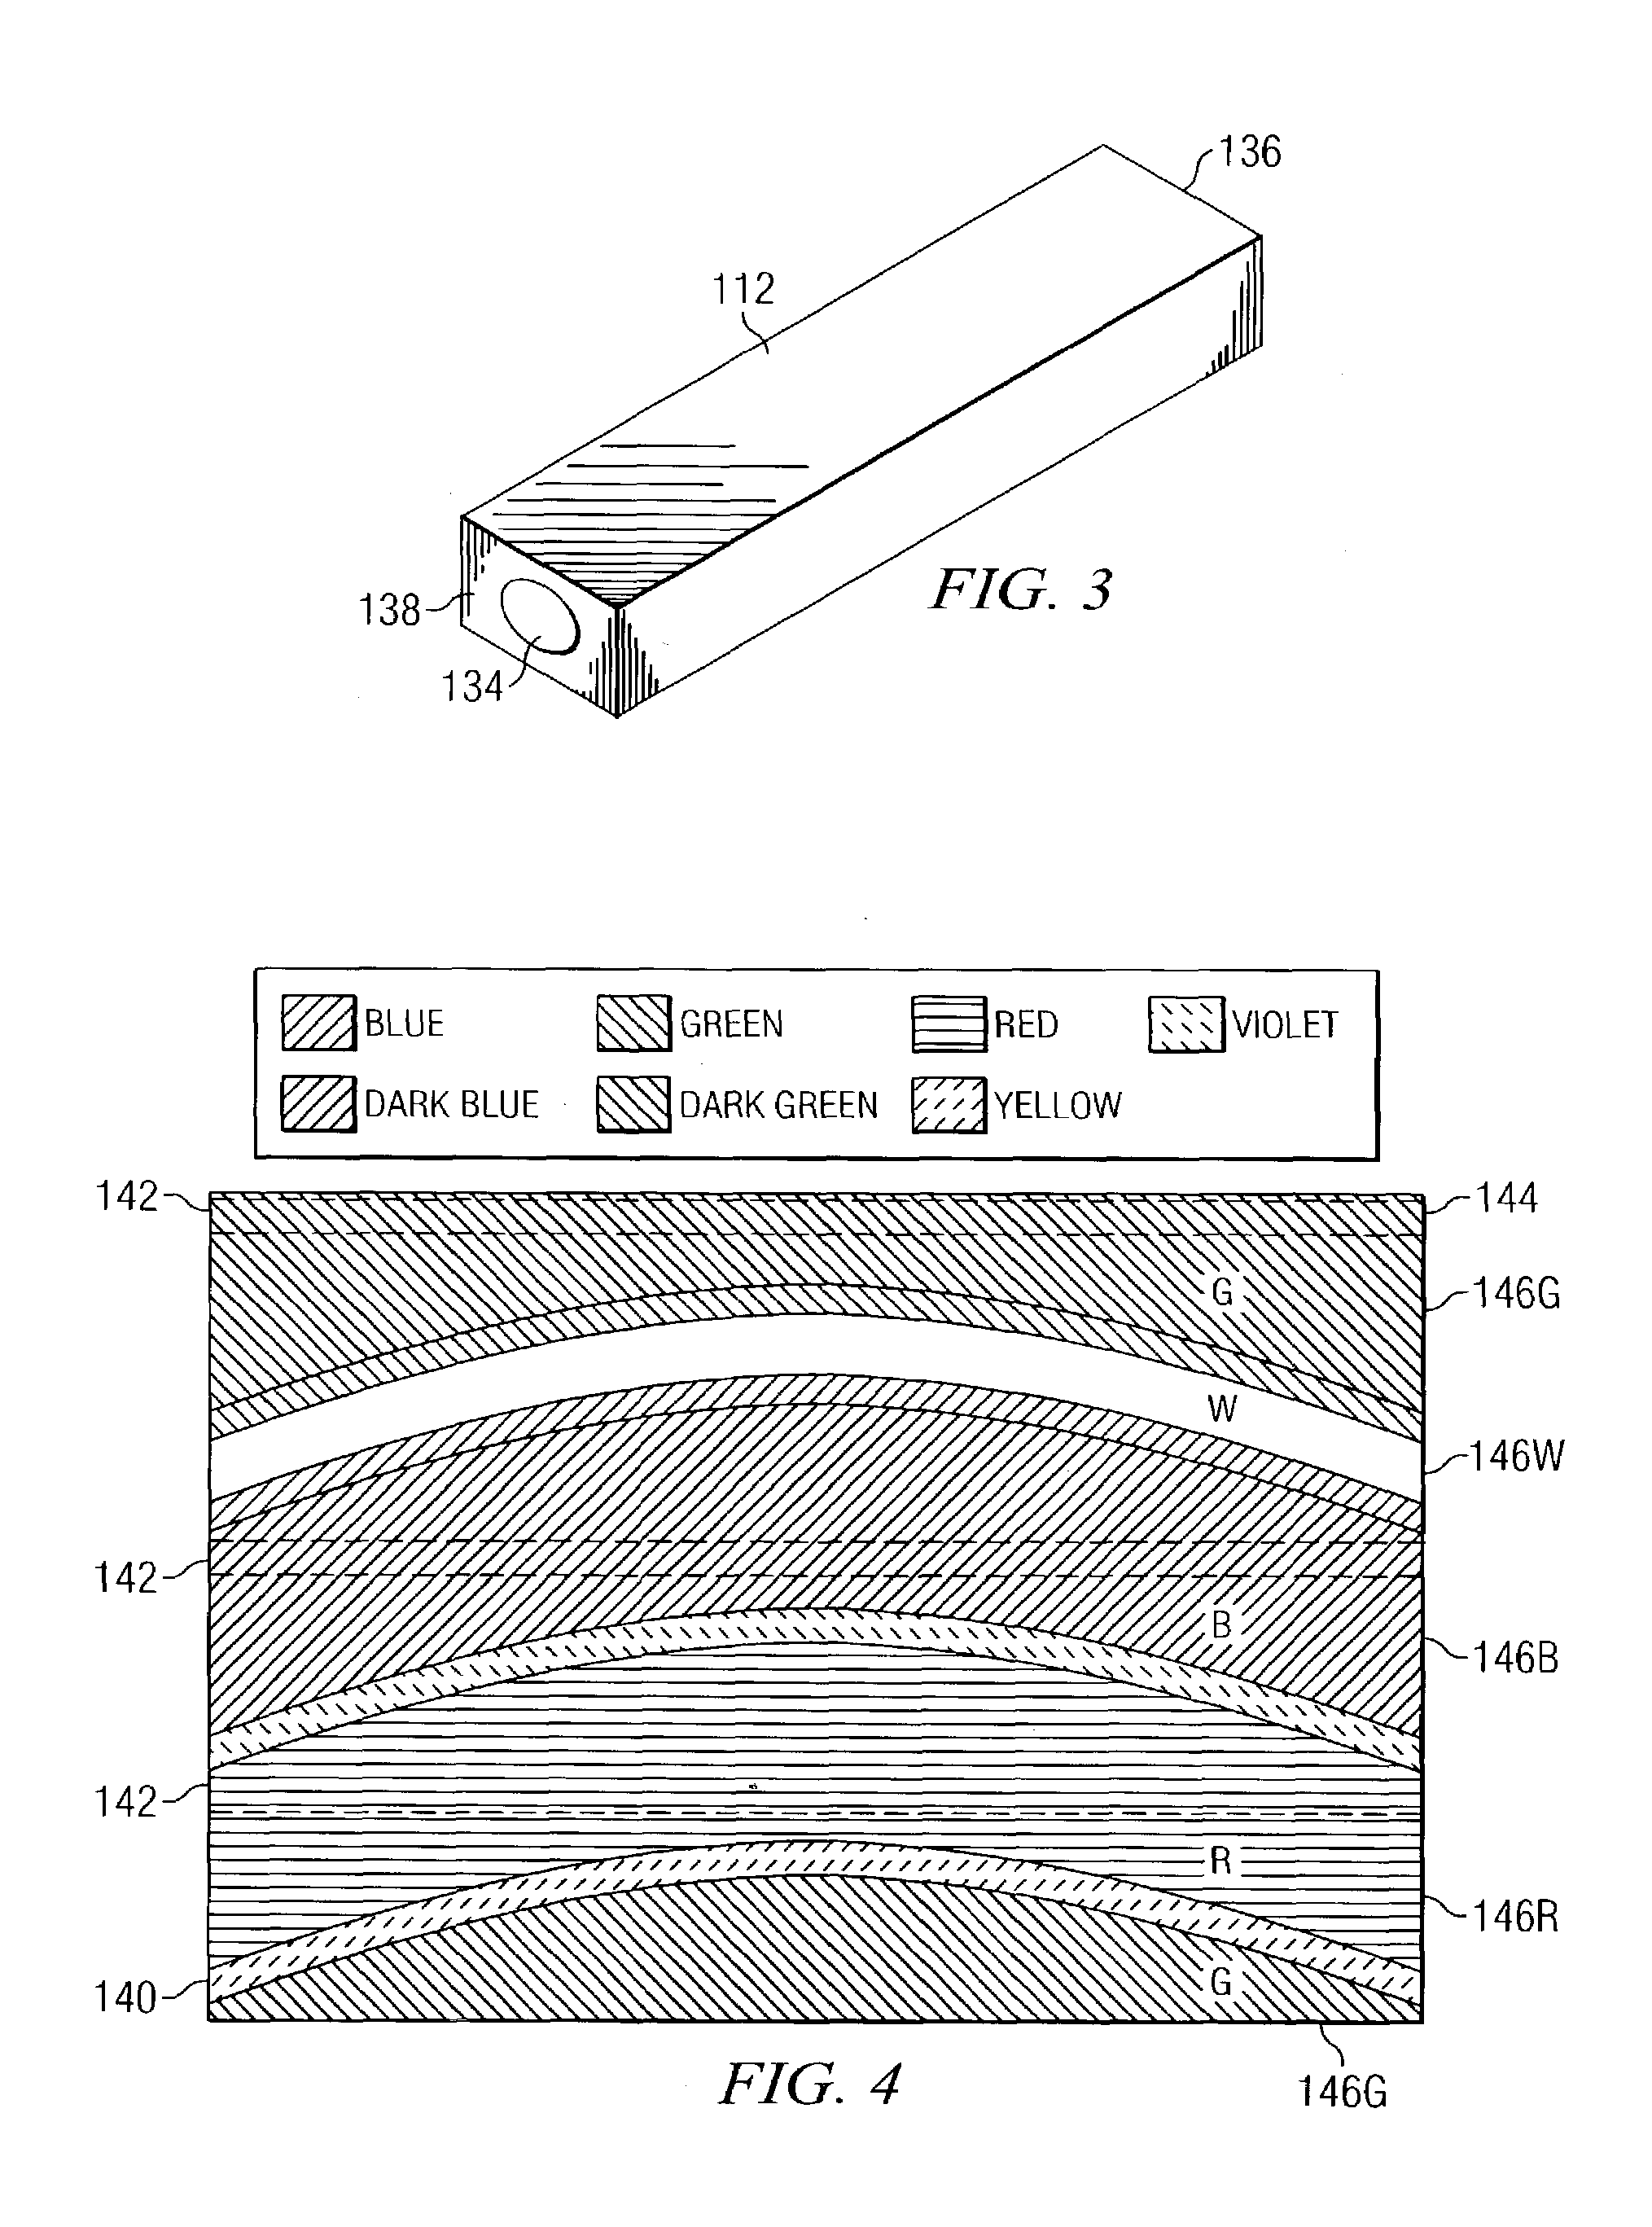 Constant-weight bit-slice PWM method and system for scrolling color display systems